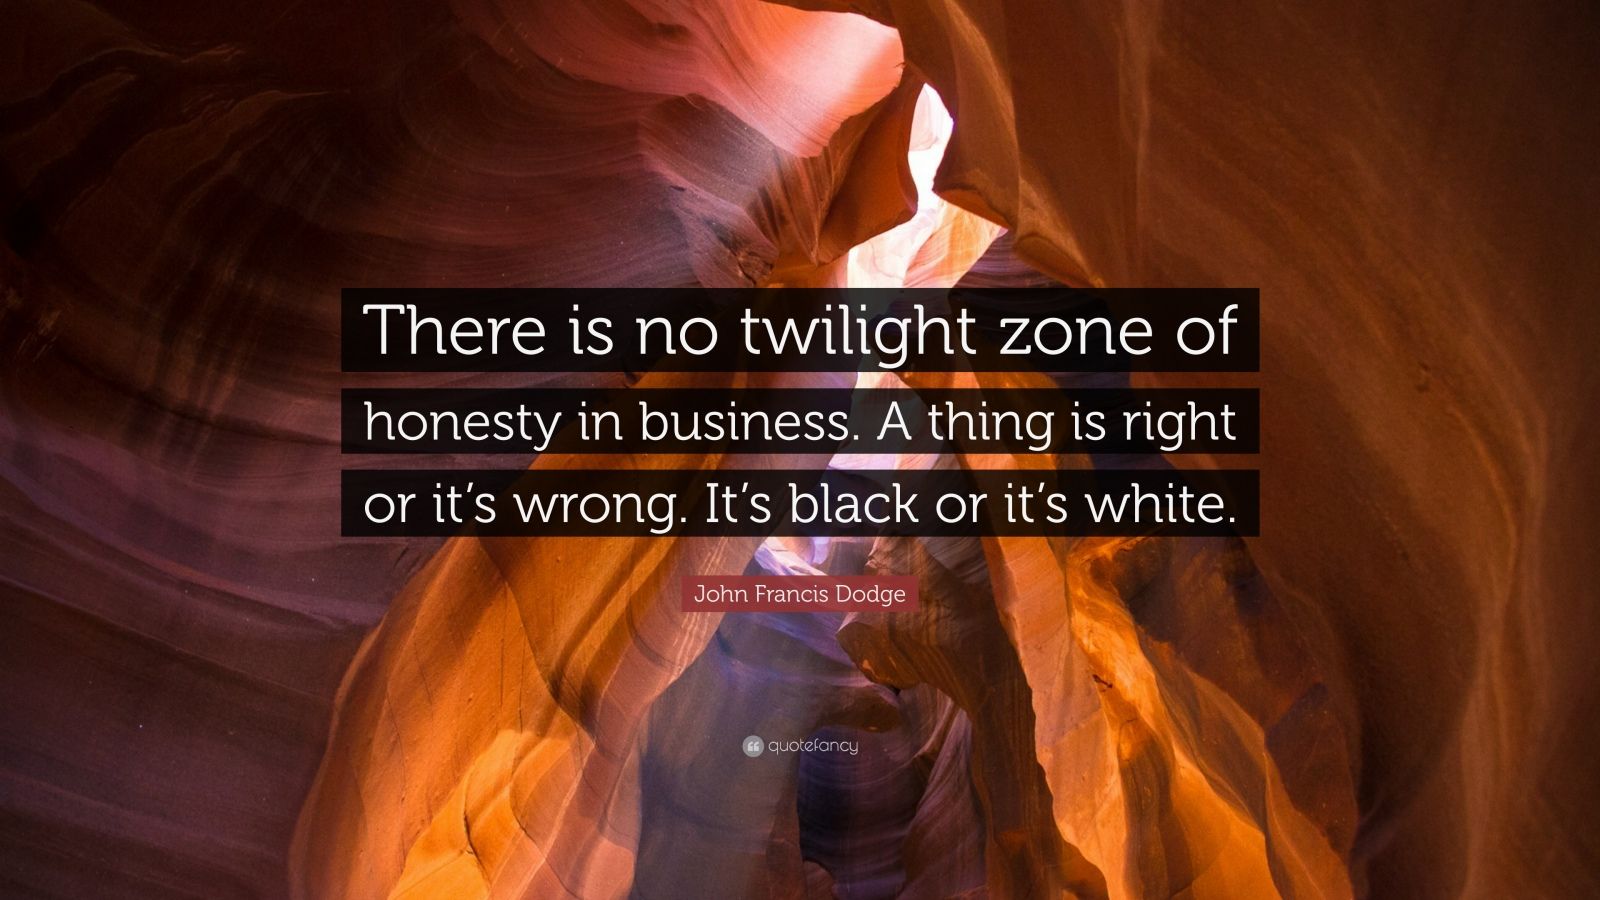 John Francis Dodge Quote: “There is no twilight zone of ...